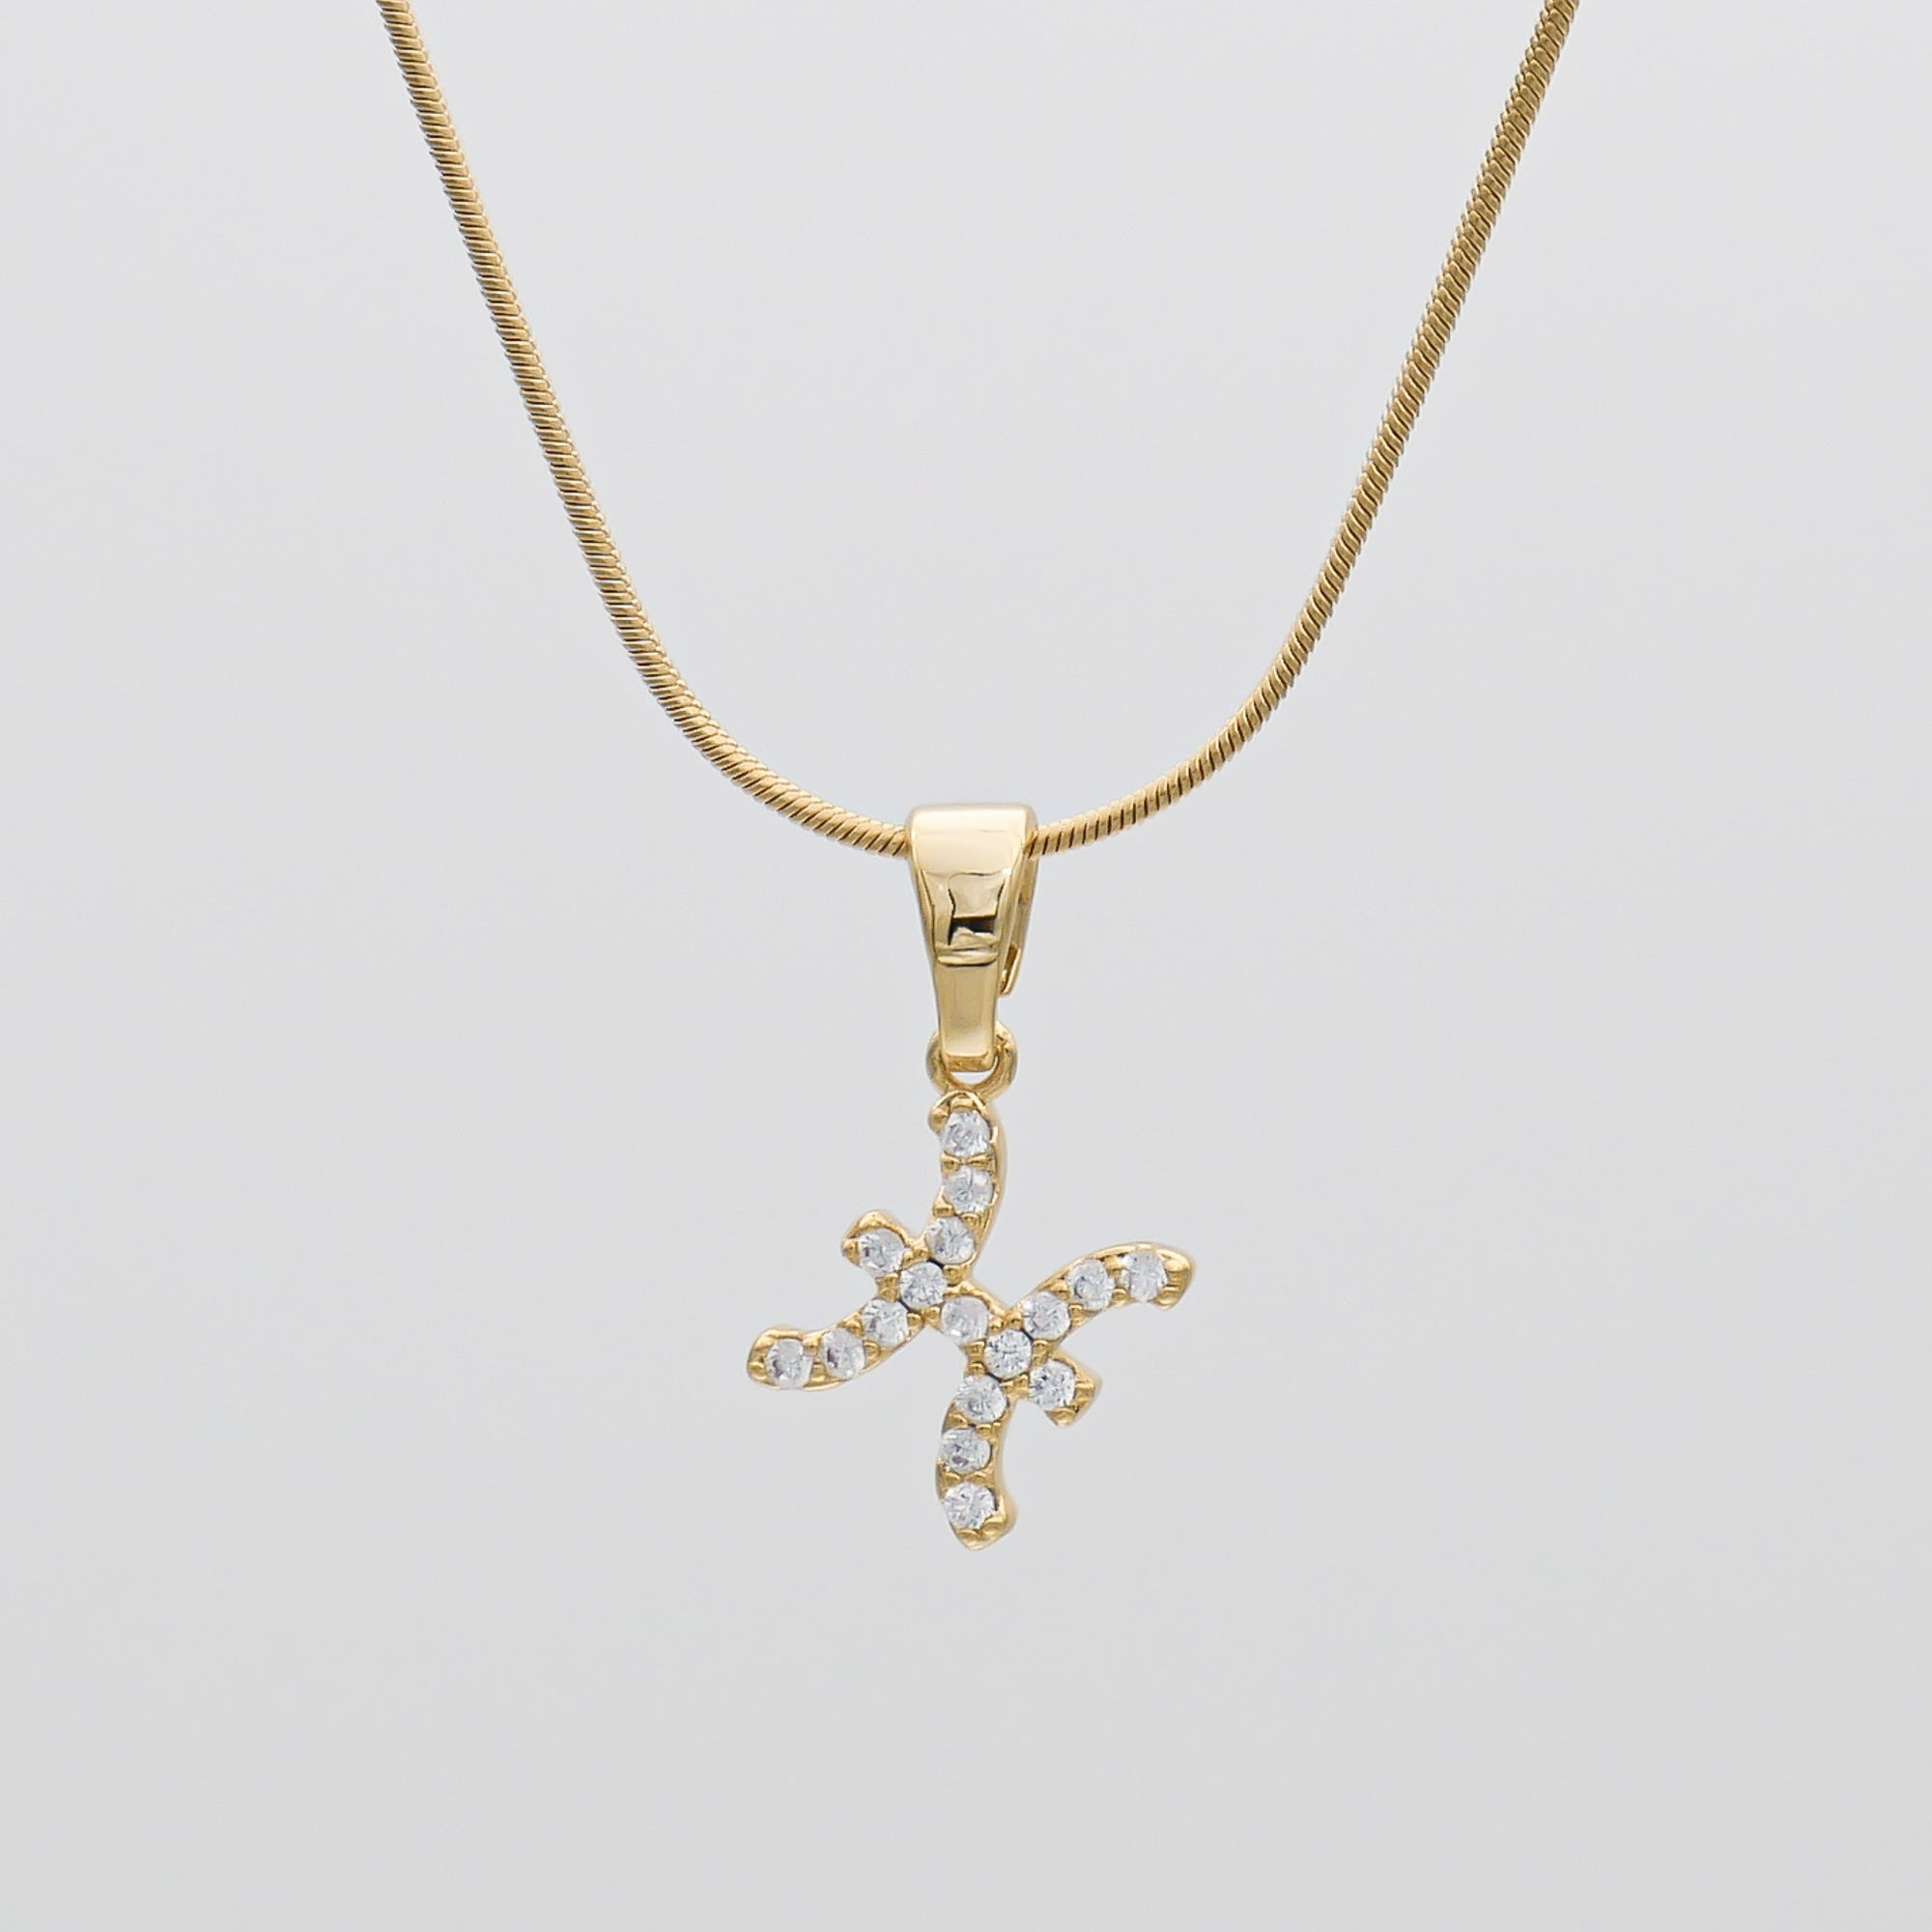 Gold ICY Zodiac Pisces Symbol Pendant Necklace by PRYA